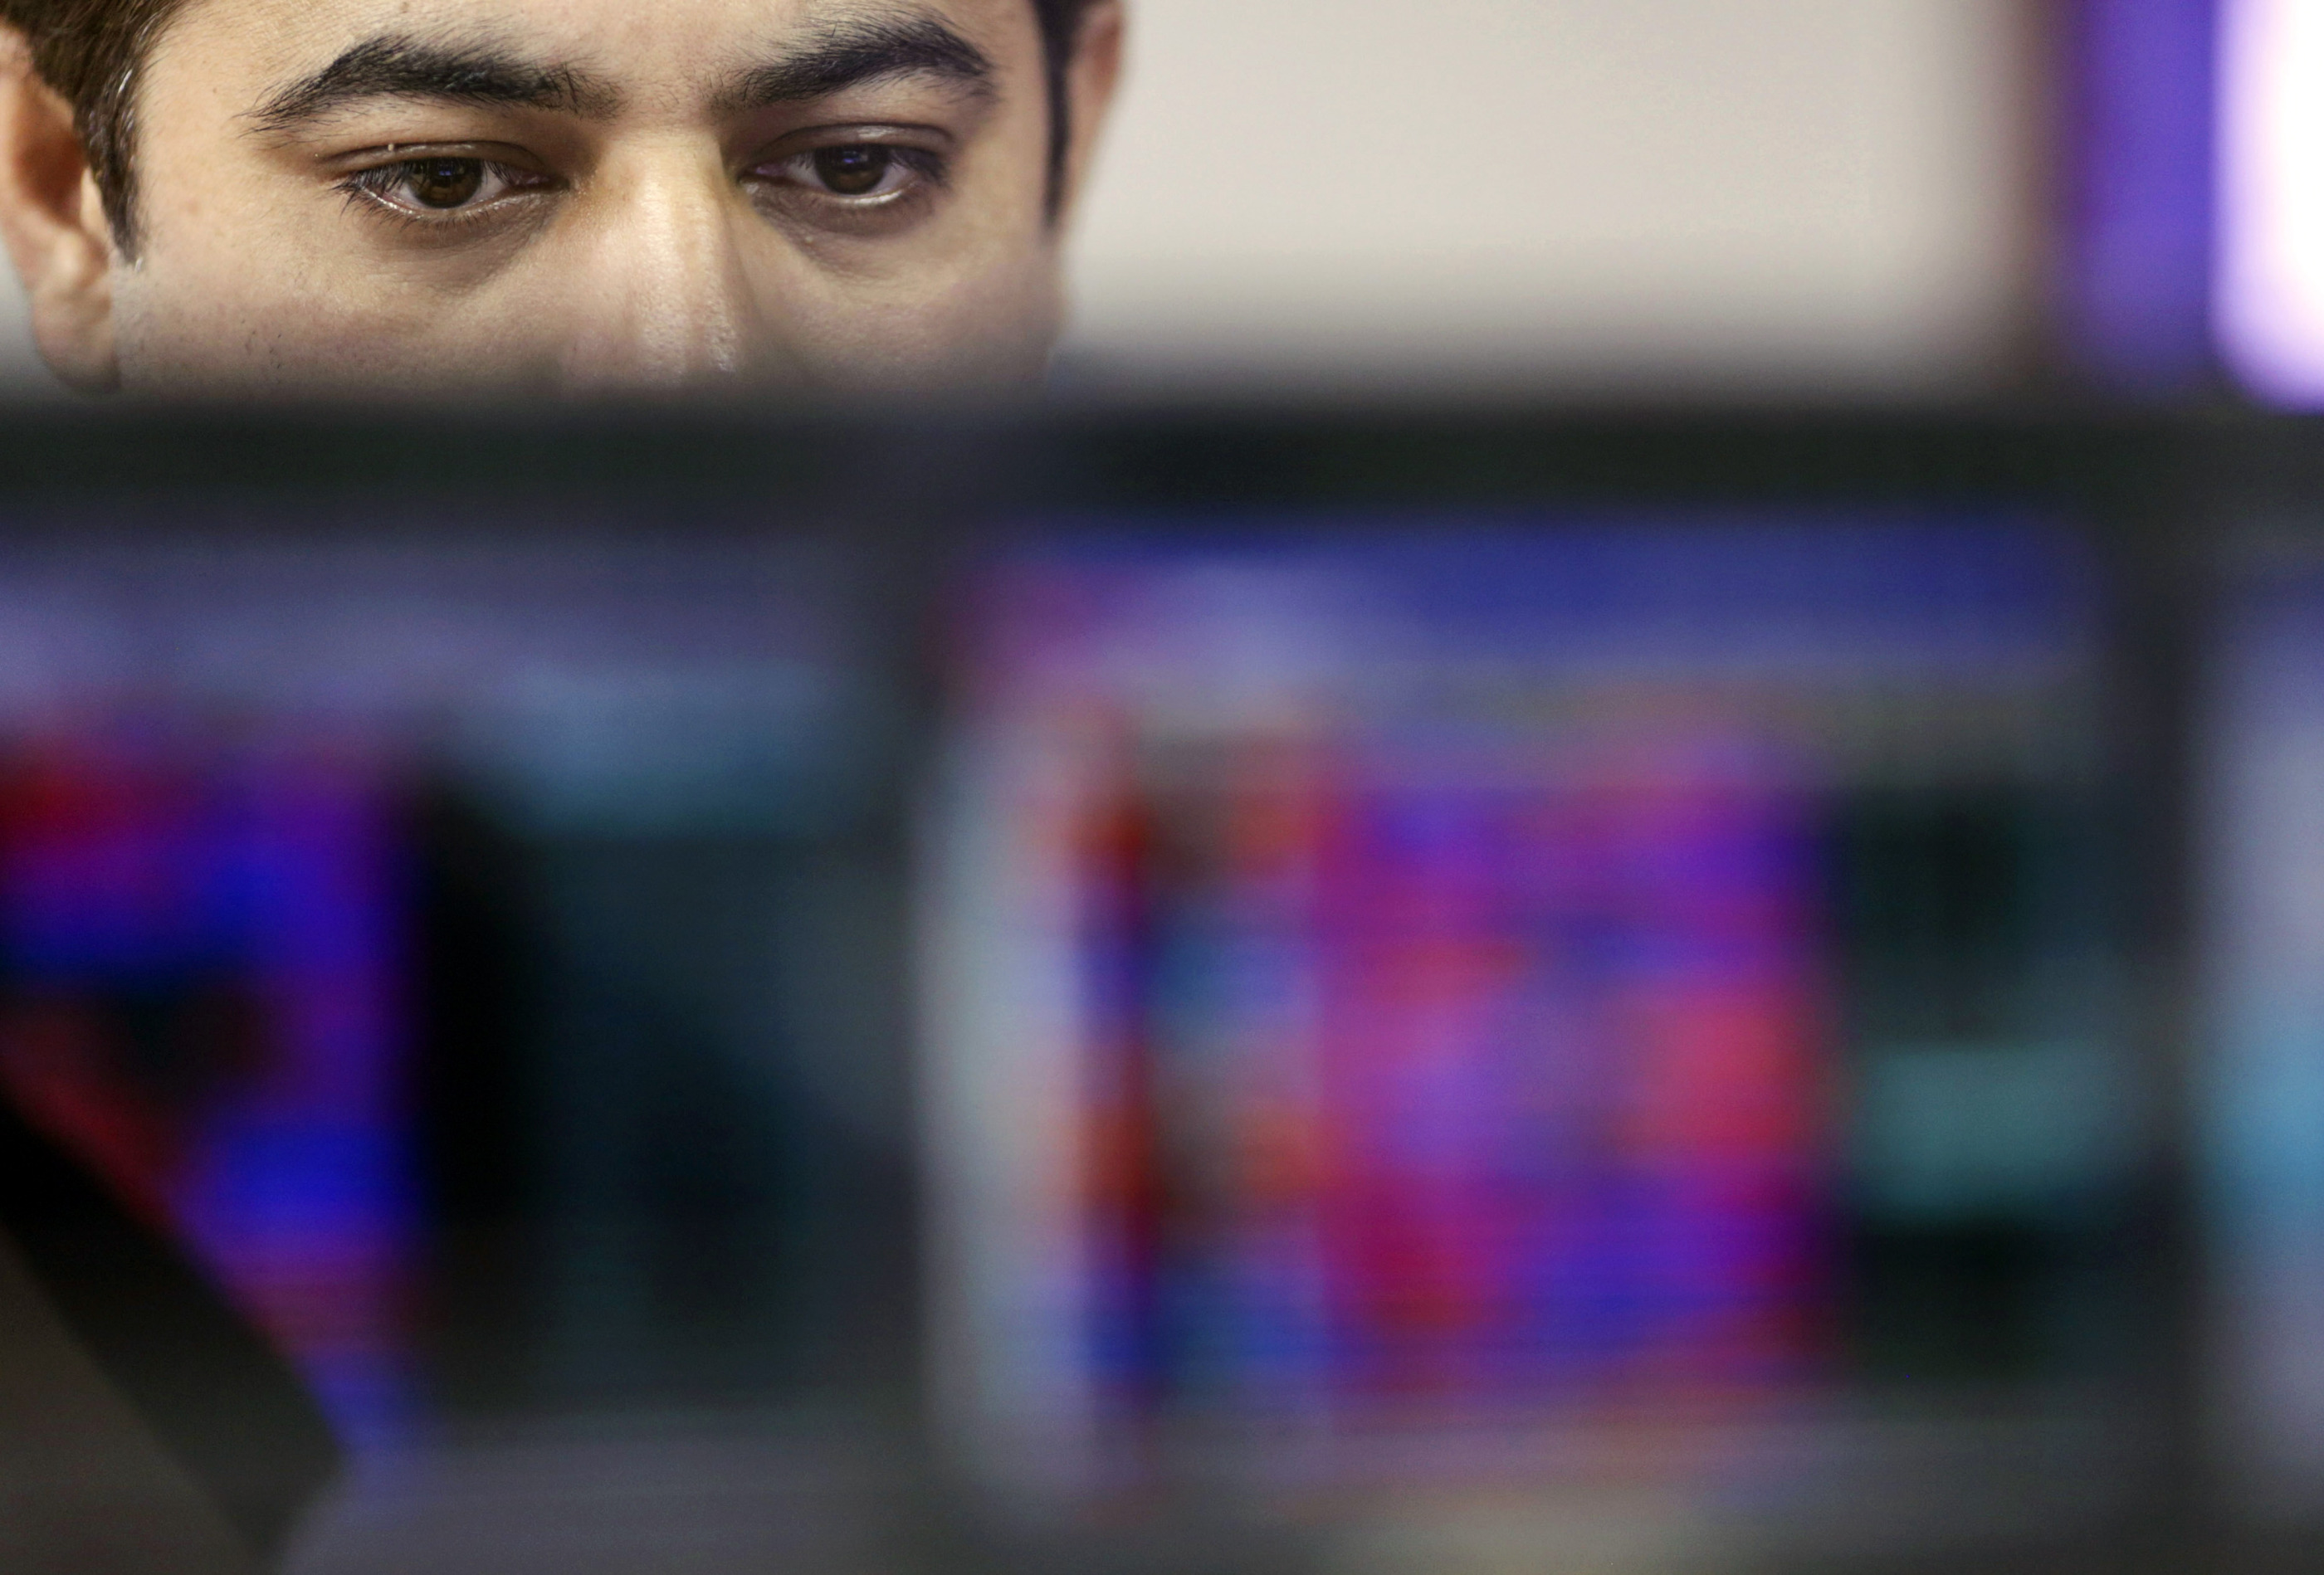 An employee monitors securities on a computer monitor at a brokerage firm in Mumbai, India, on Tuesday, Aug. 25, 2015. Indian stocks advanced in volatile trading a day after the benchmark gauge plunged the most in six years, as banks helped counter declines in software exporters.